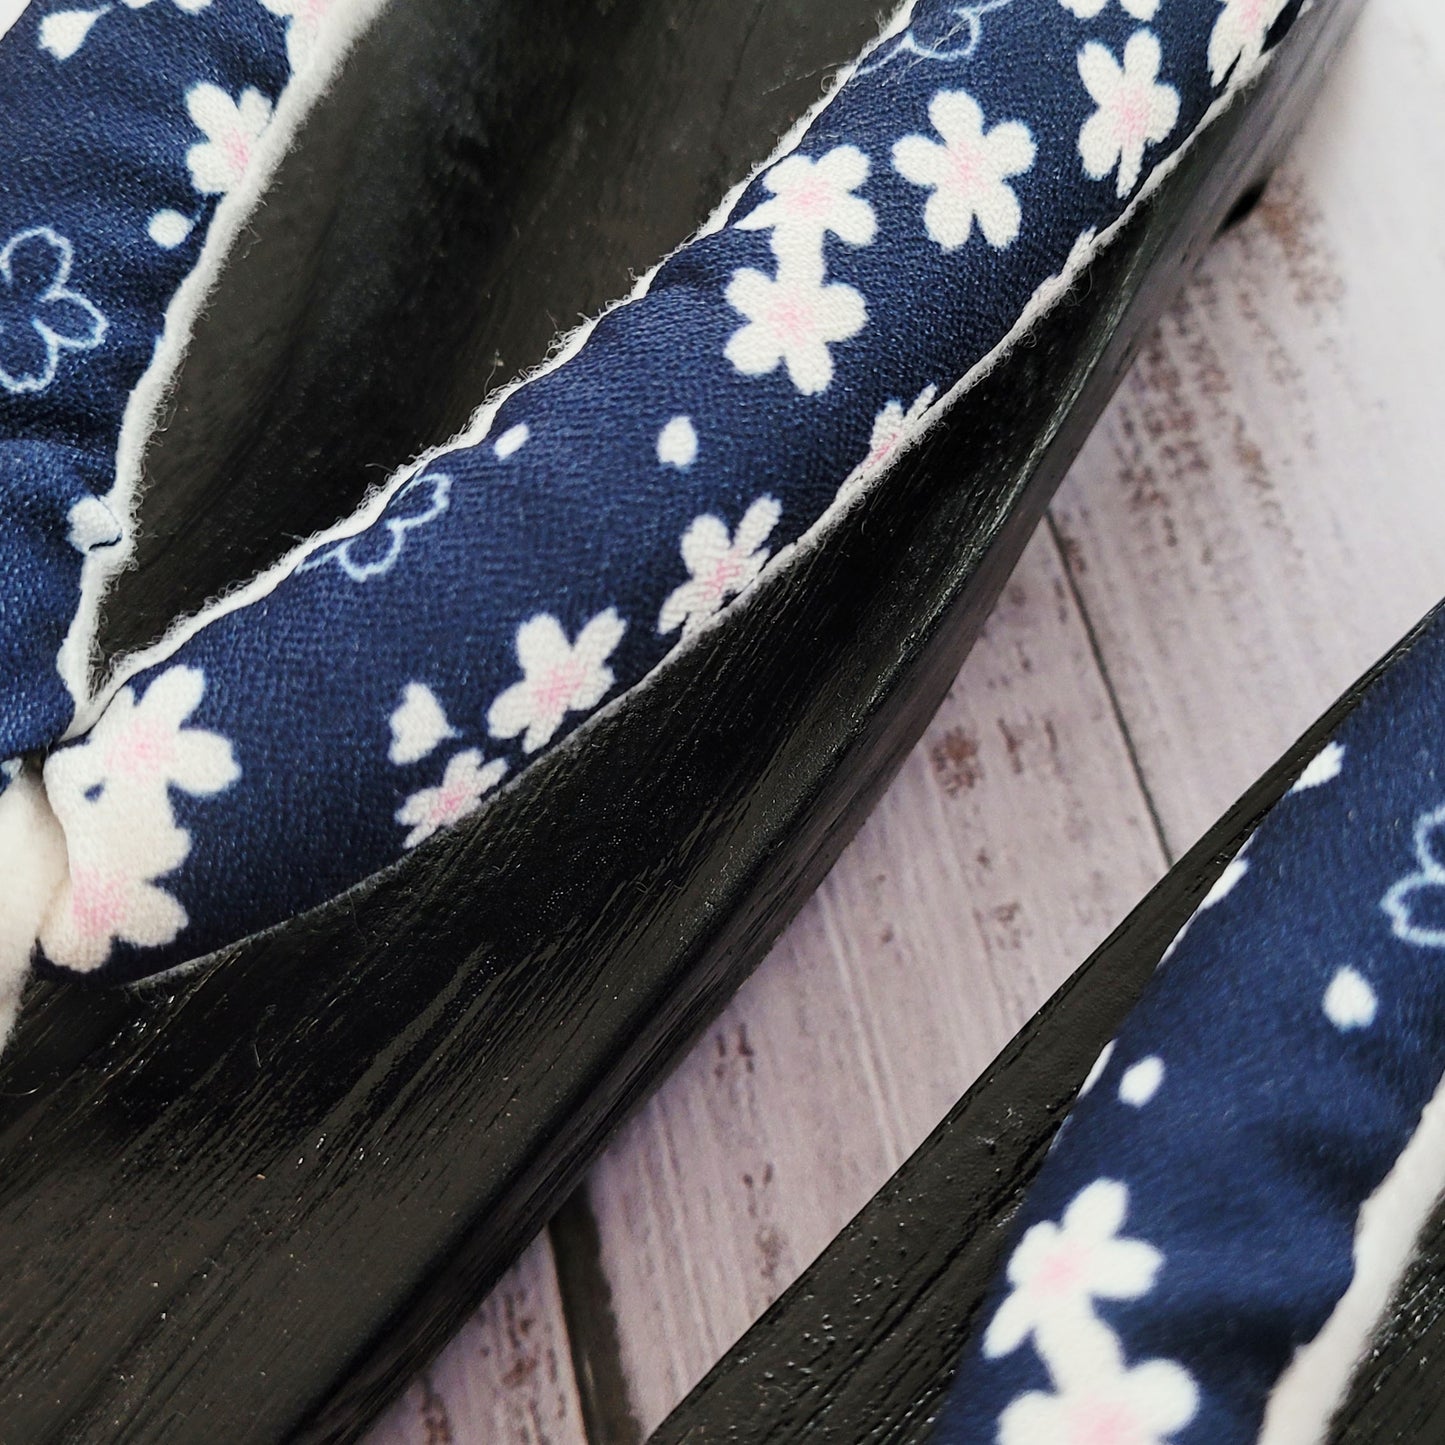 Geta Sandals with Blue Flowers in Navy